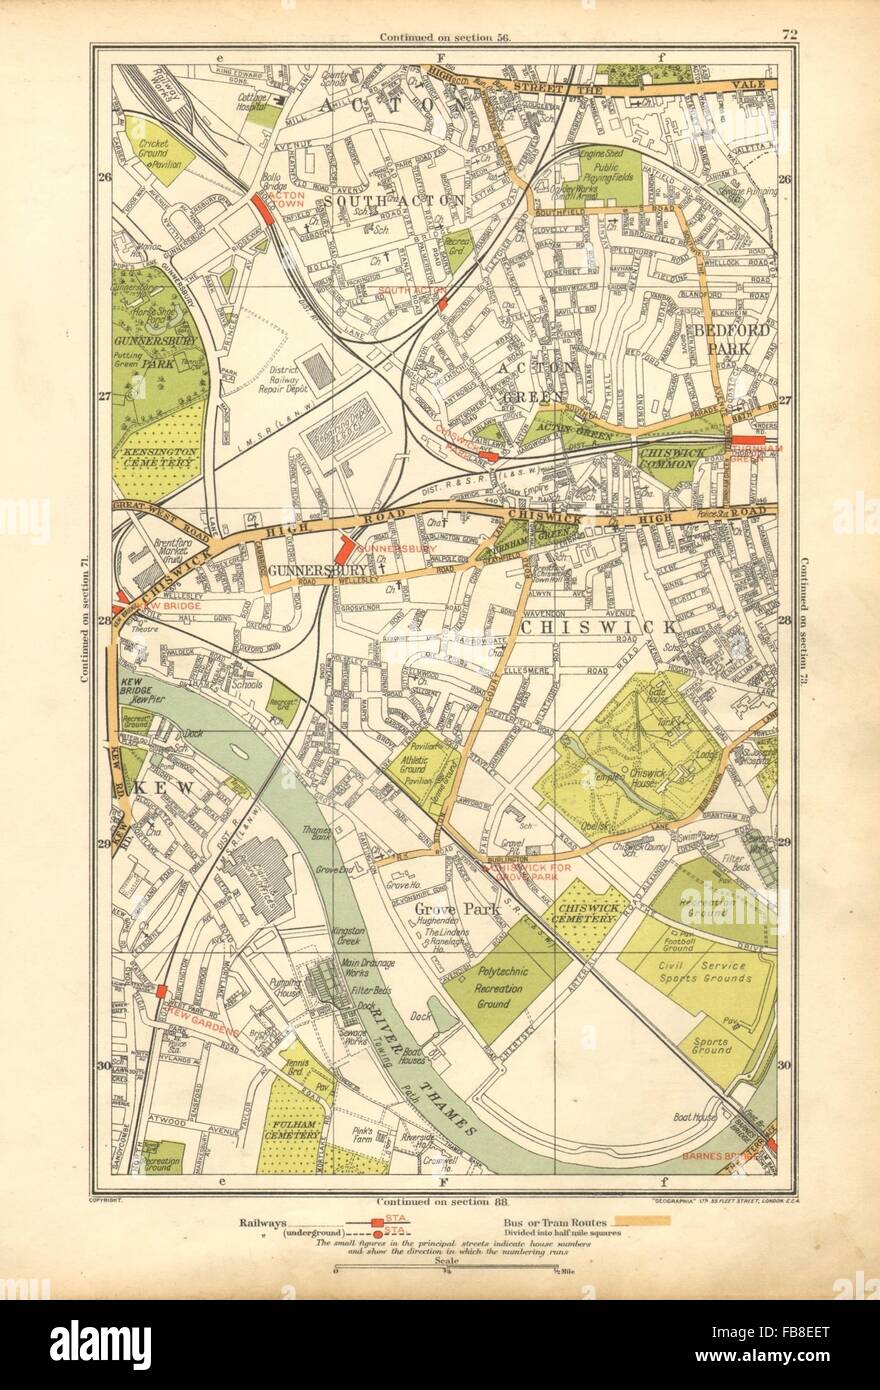 CHISWICK : Acton Green, Grove Park, Bedford Park, Kew, Gunnersbury, 1928 map Banque D'Images